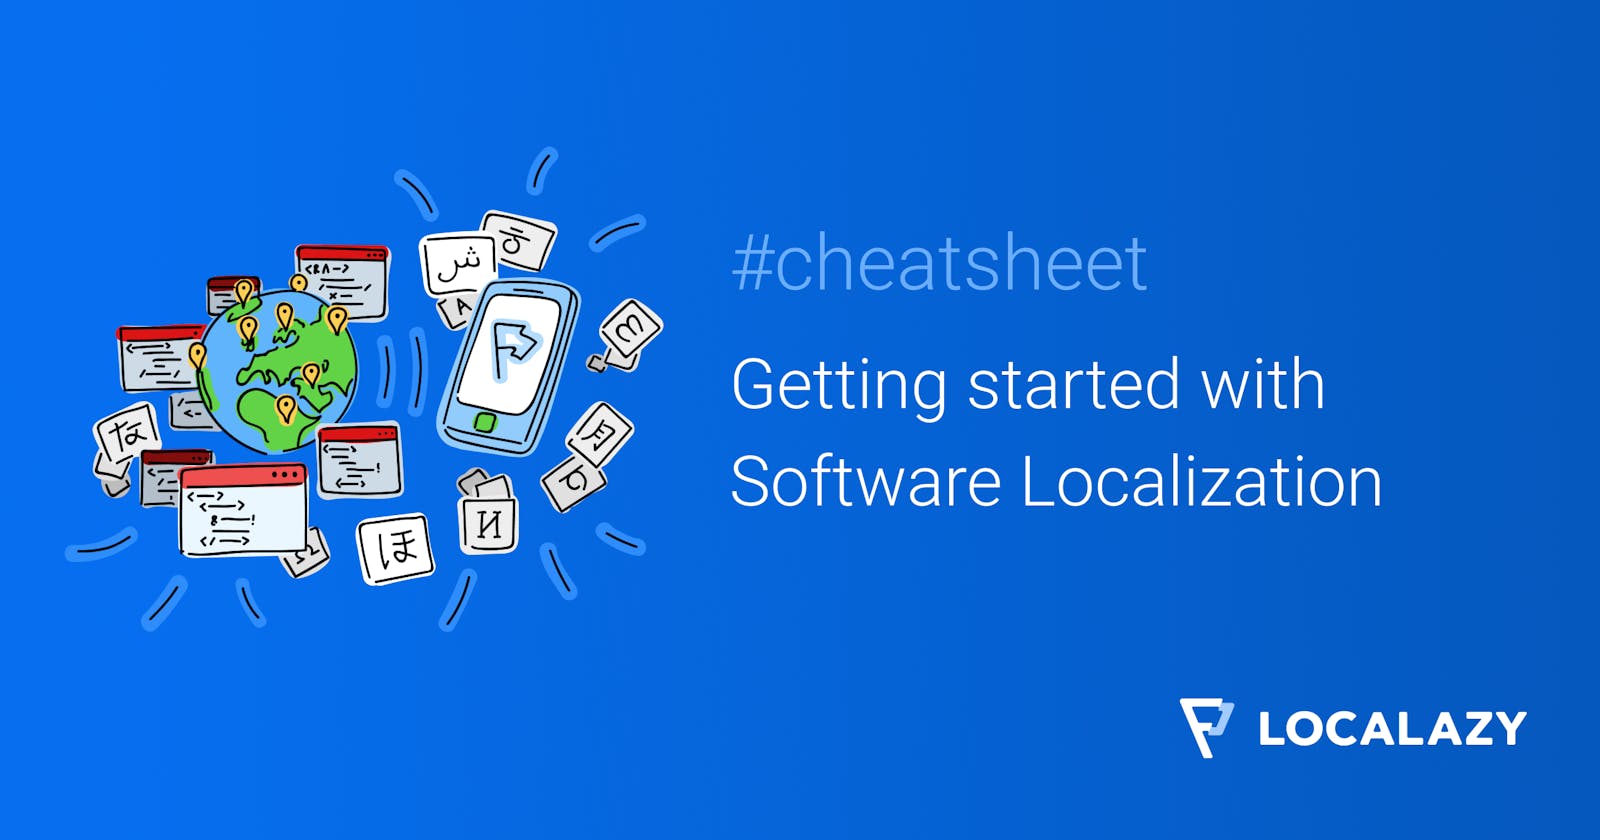 Cheatsheet: Getting started with Software Localization